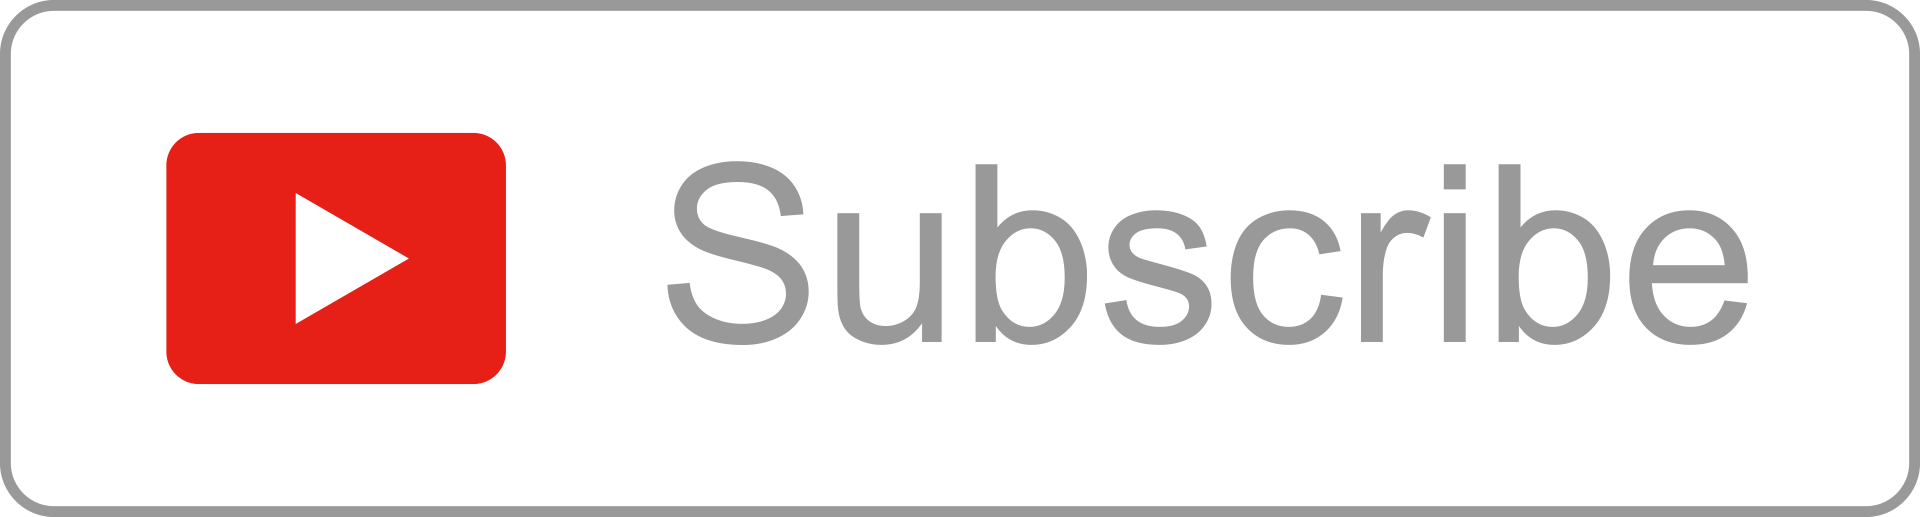 outline youtube subscribe button picture free download #27826